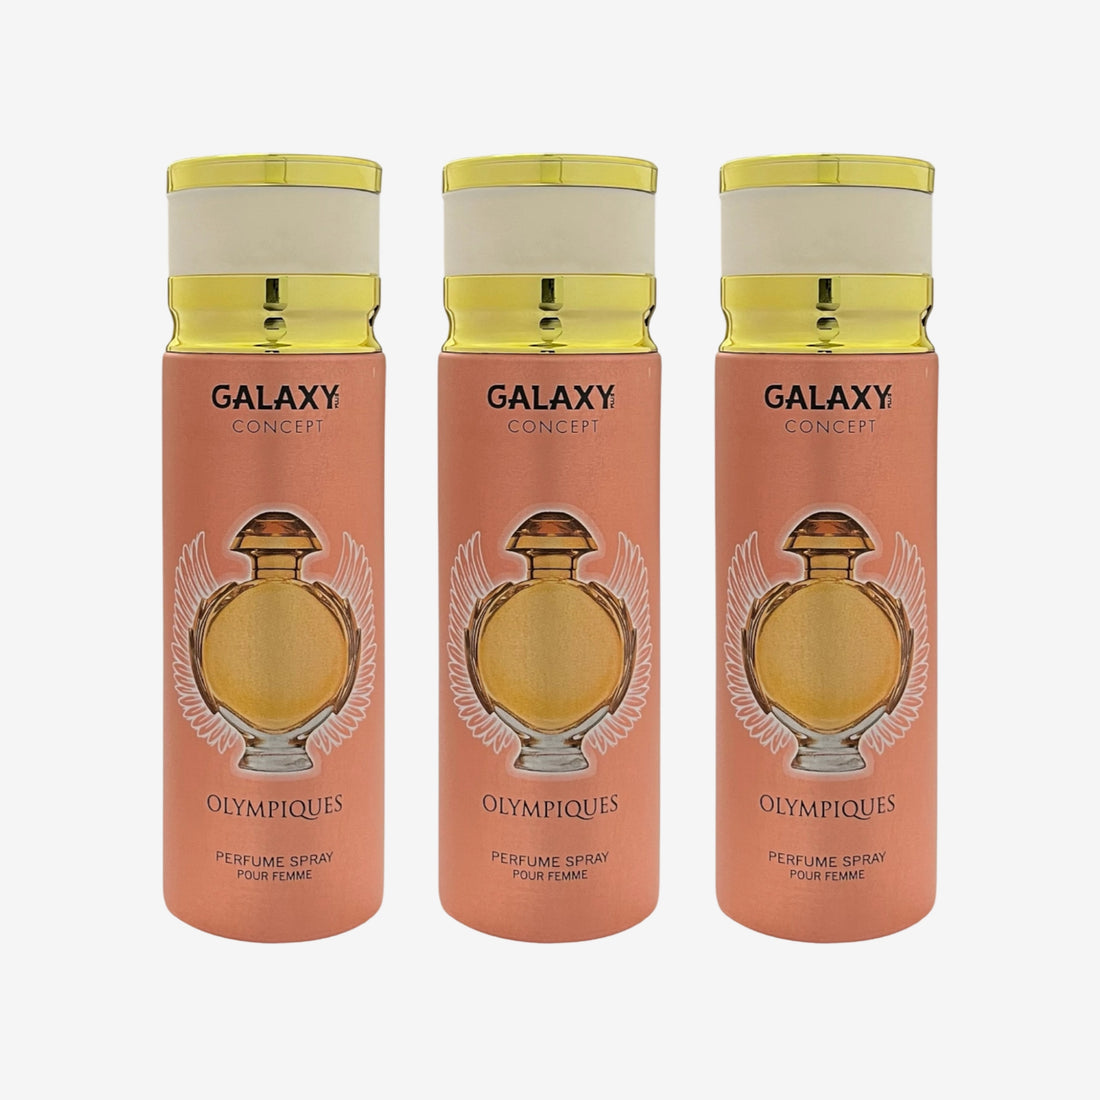 Galaxy Plus Concept OLYMPIQUES Perfume Body Spray - Inspired By Olympea